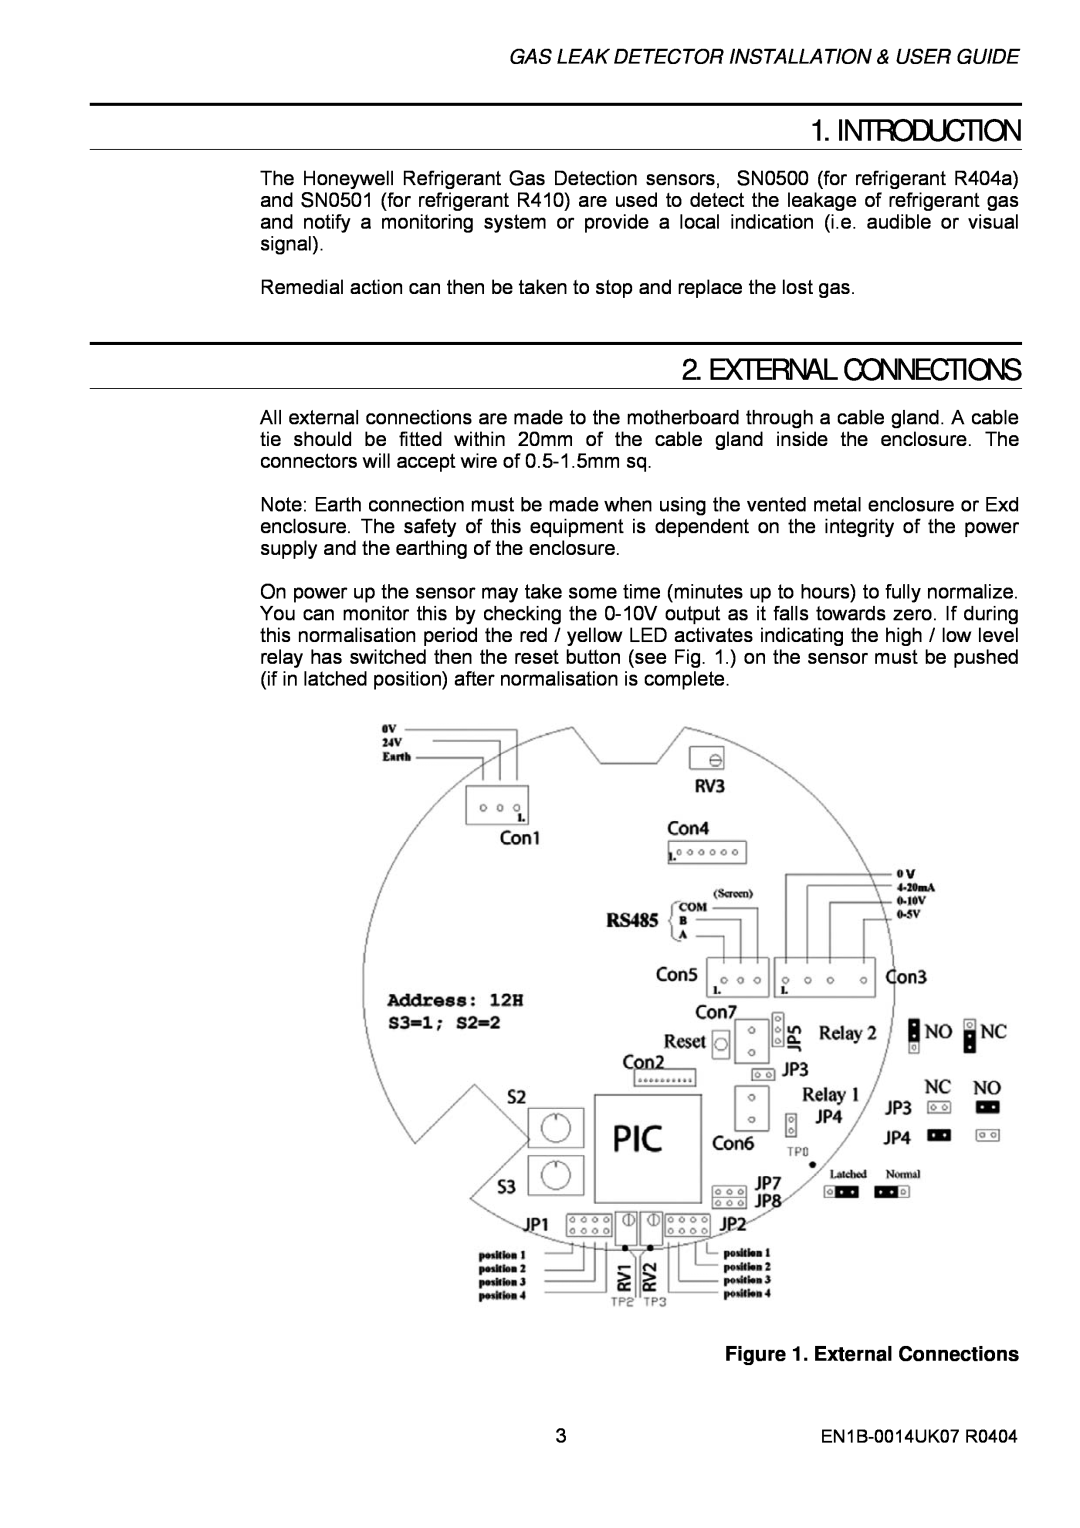 Honeywell SN0500 manual Introduction, External Connections 